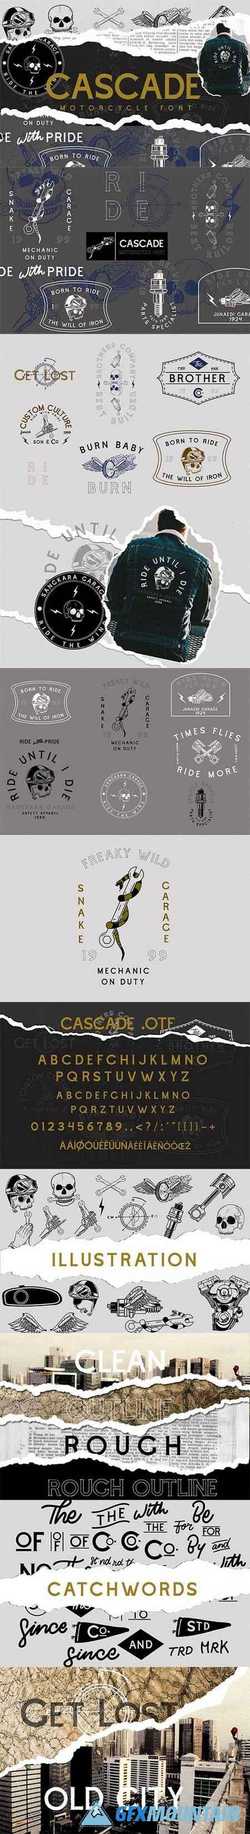 Cascade Motorcycle font 2609126